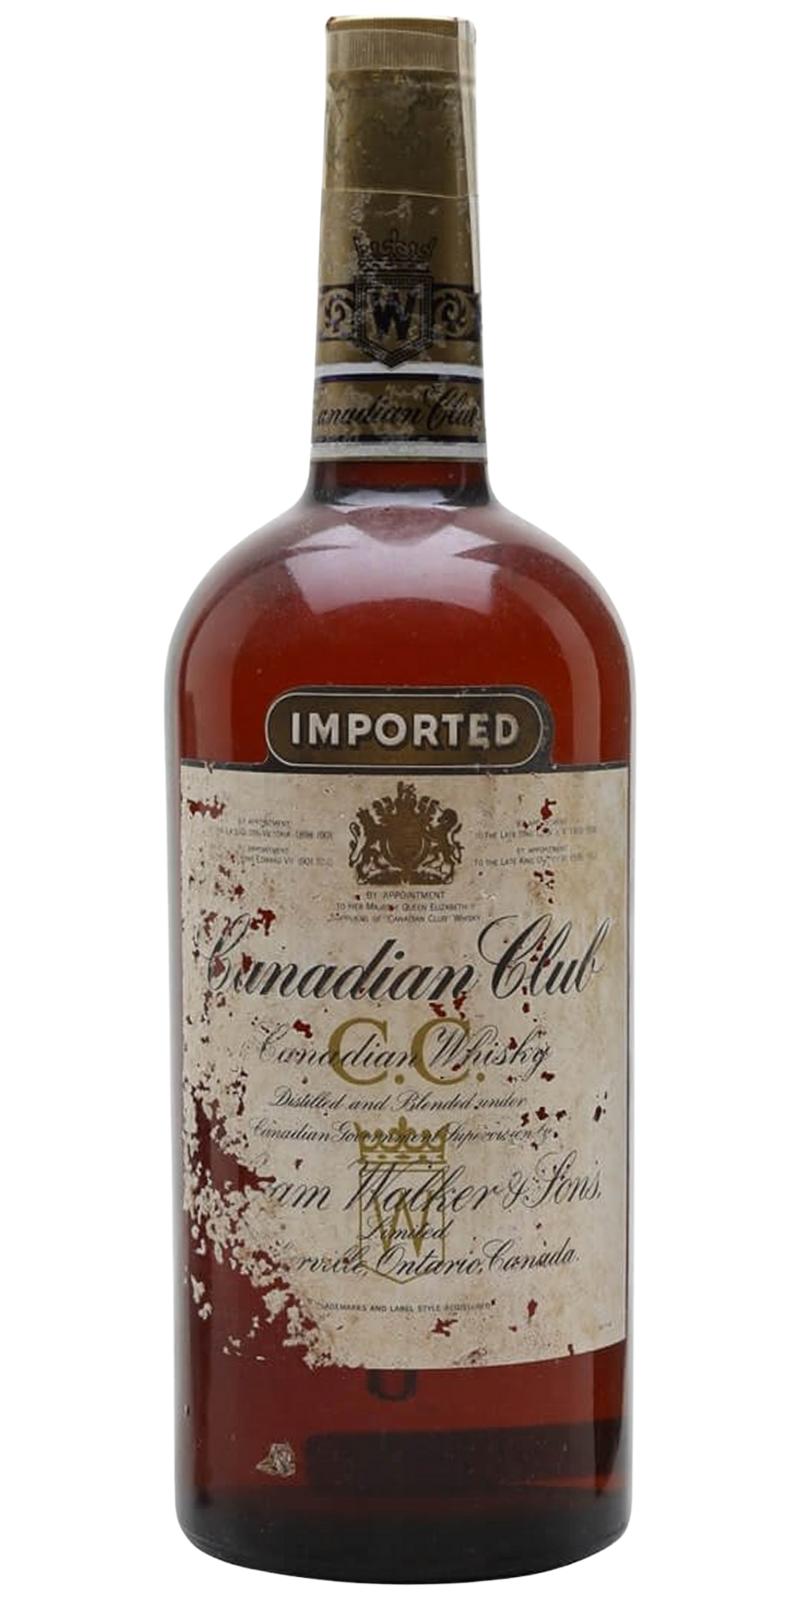 Canadian Club Imported